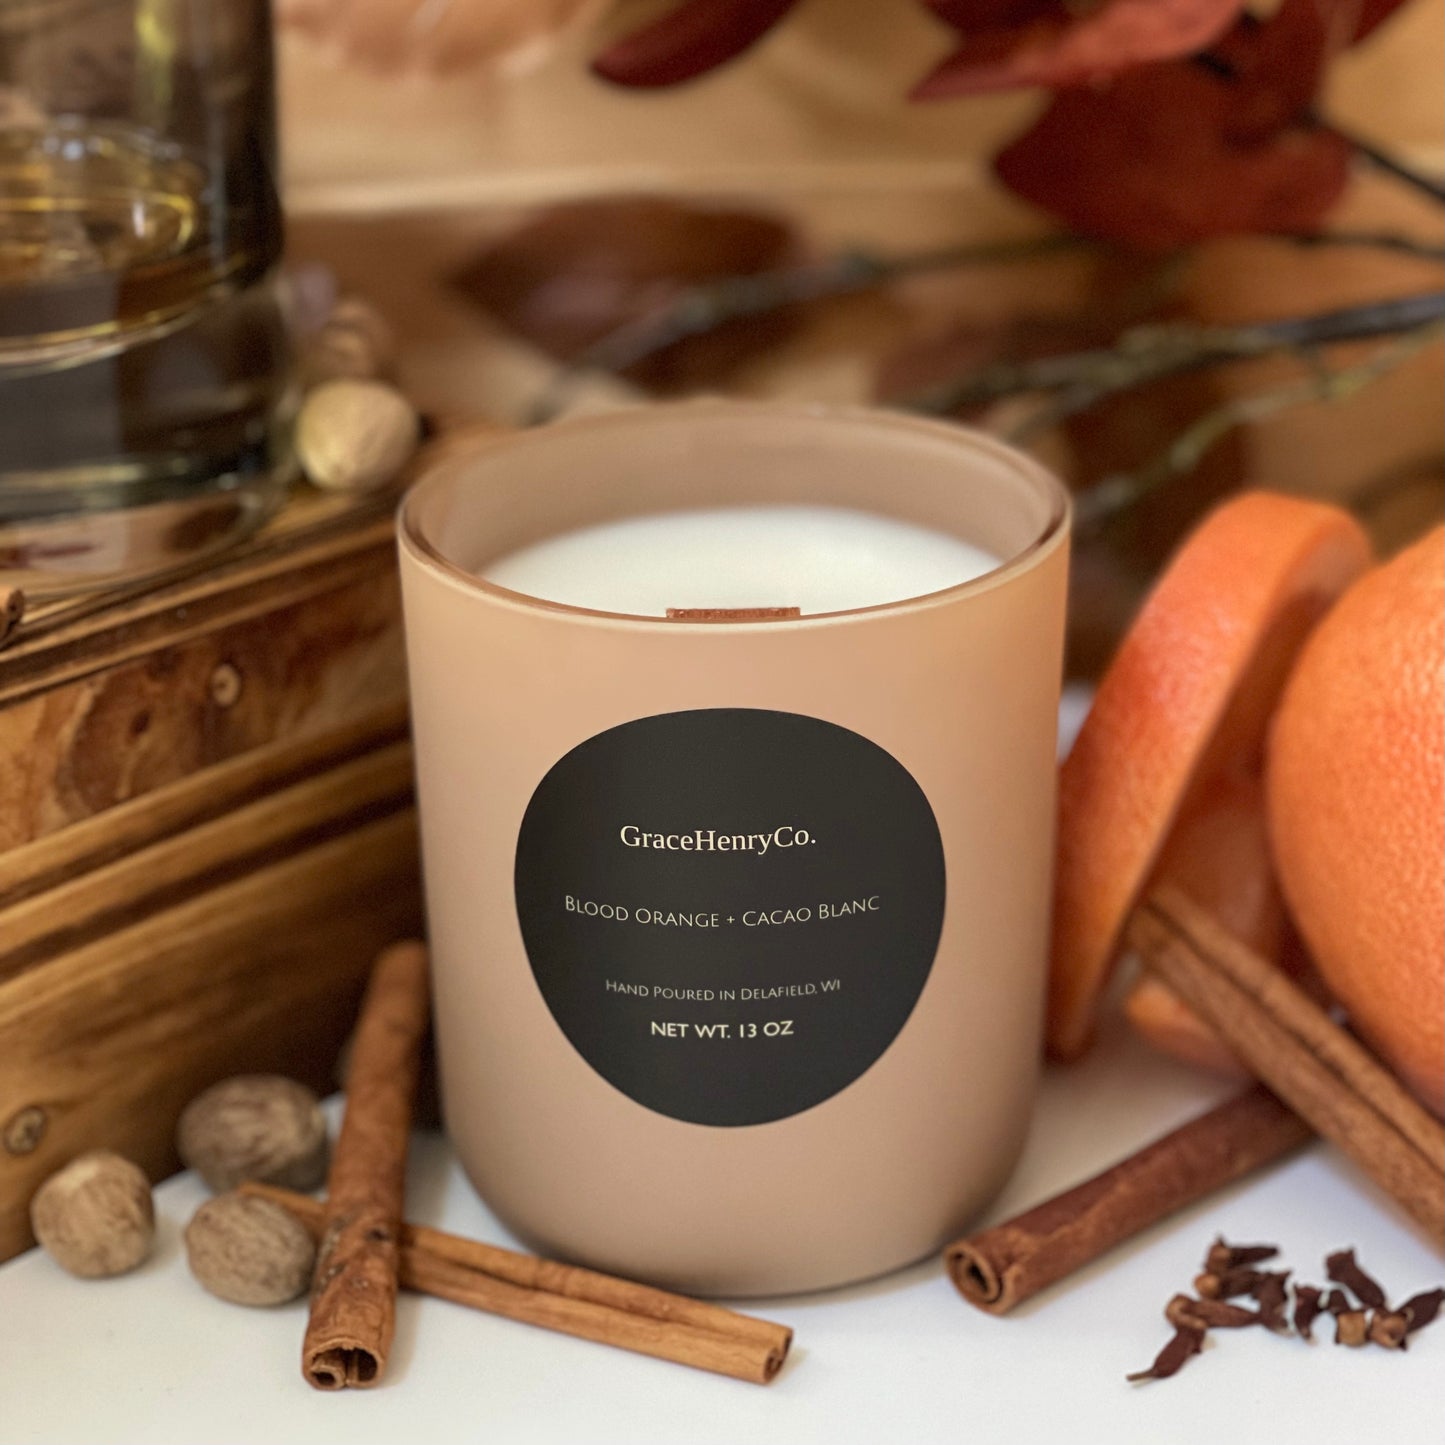 Blood Orange + Cacao Blanc 13oz Wooden Wick Candle